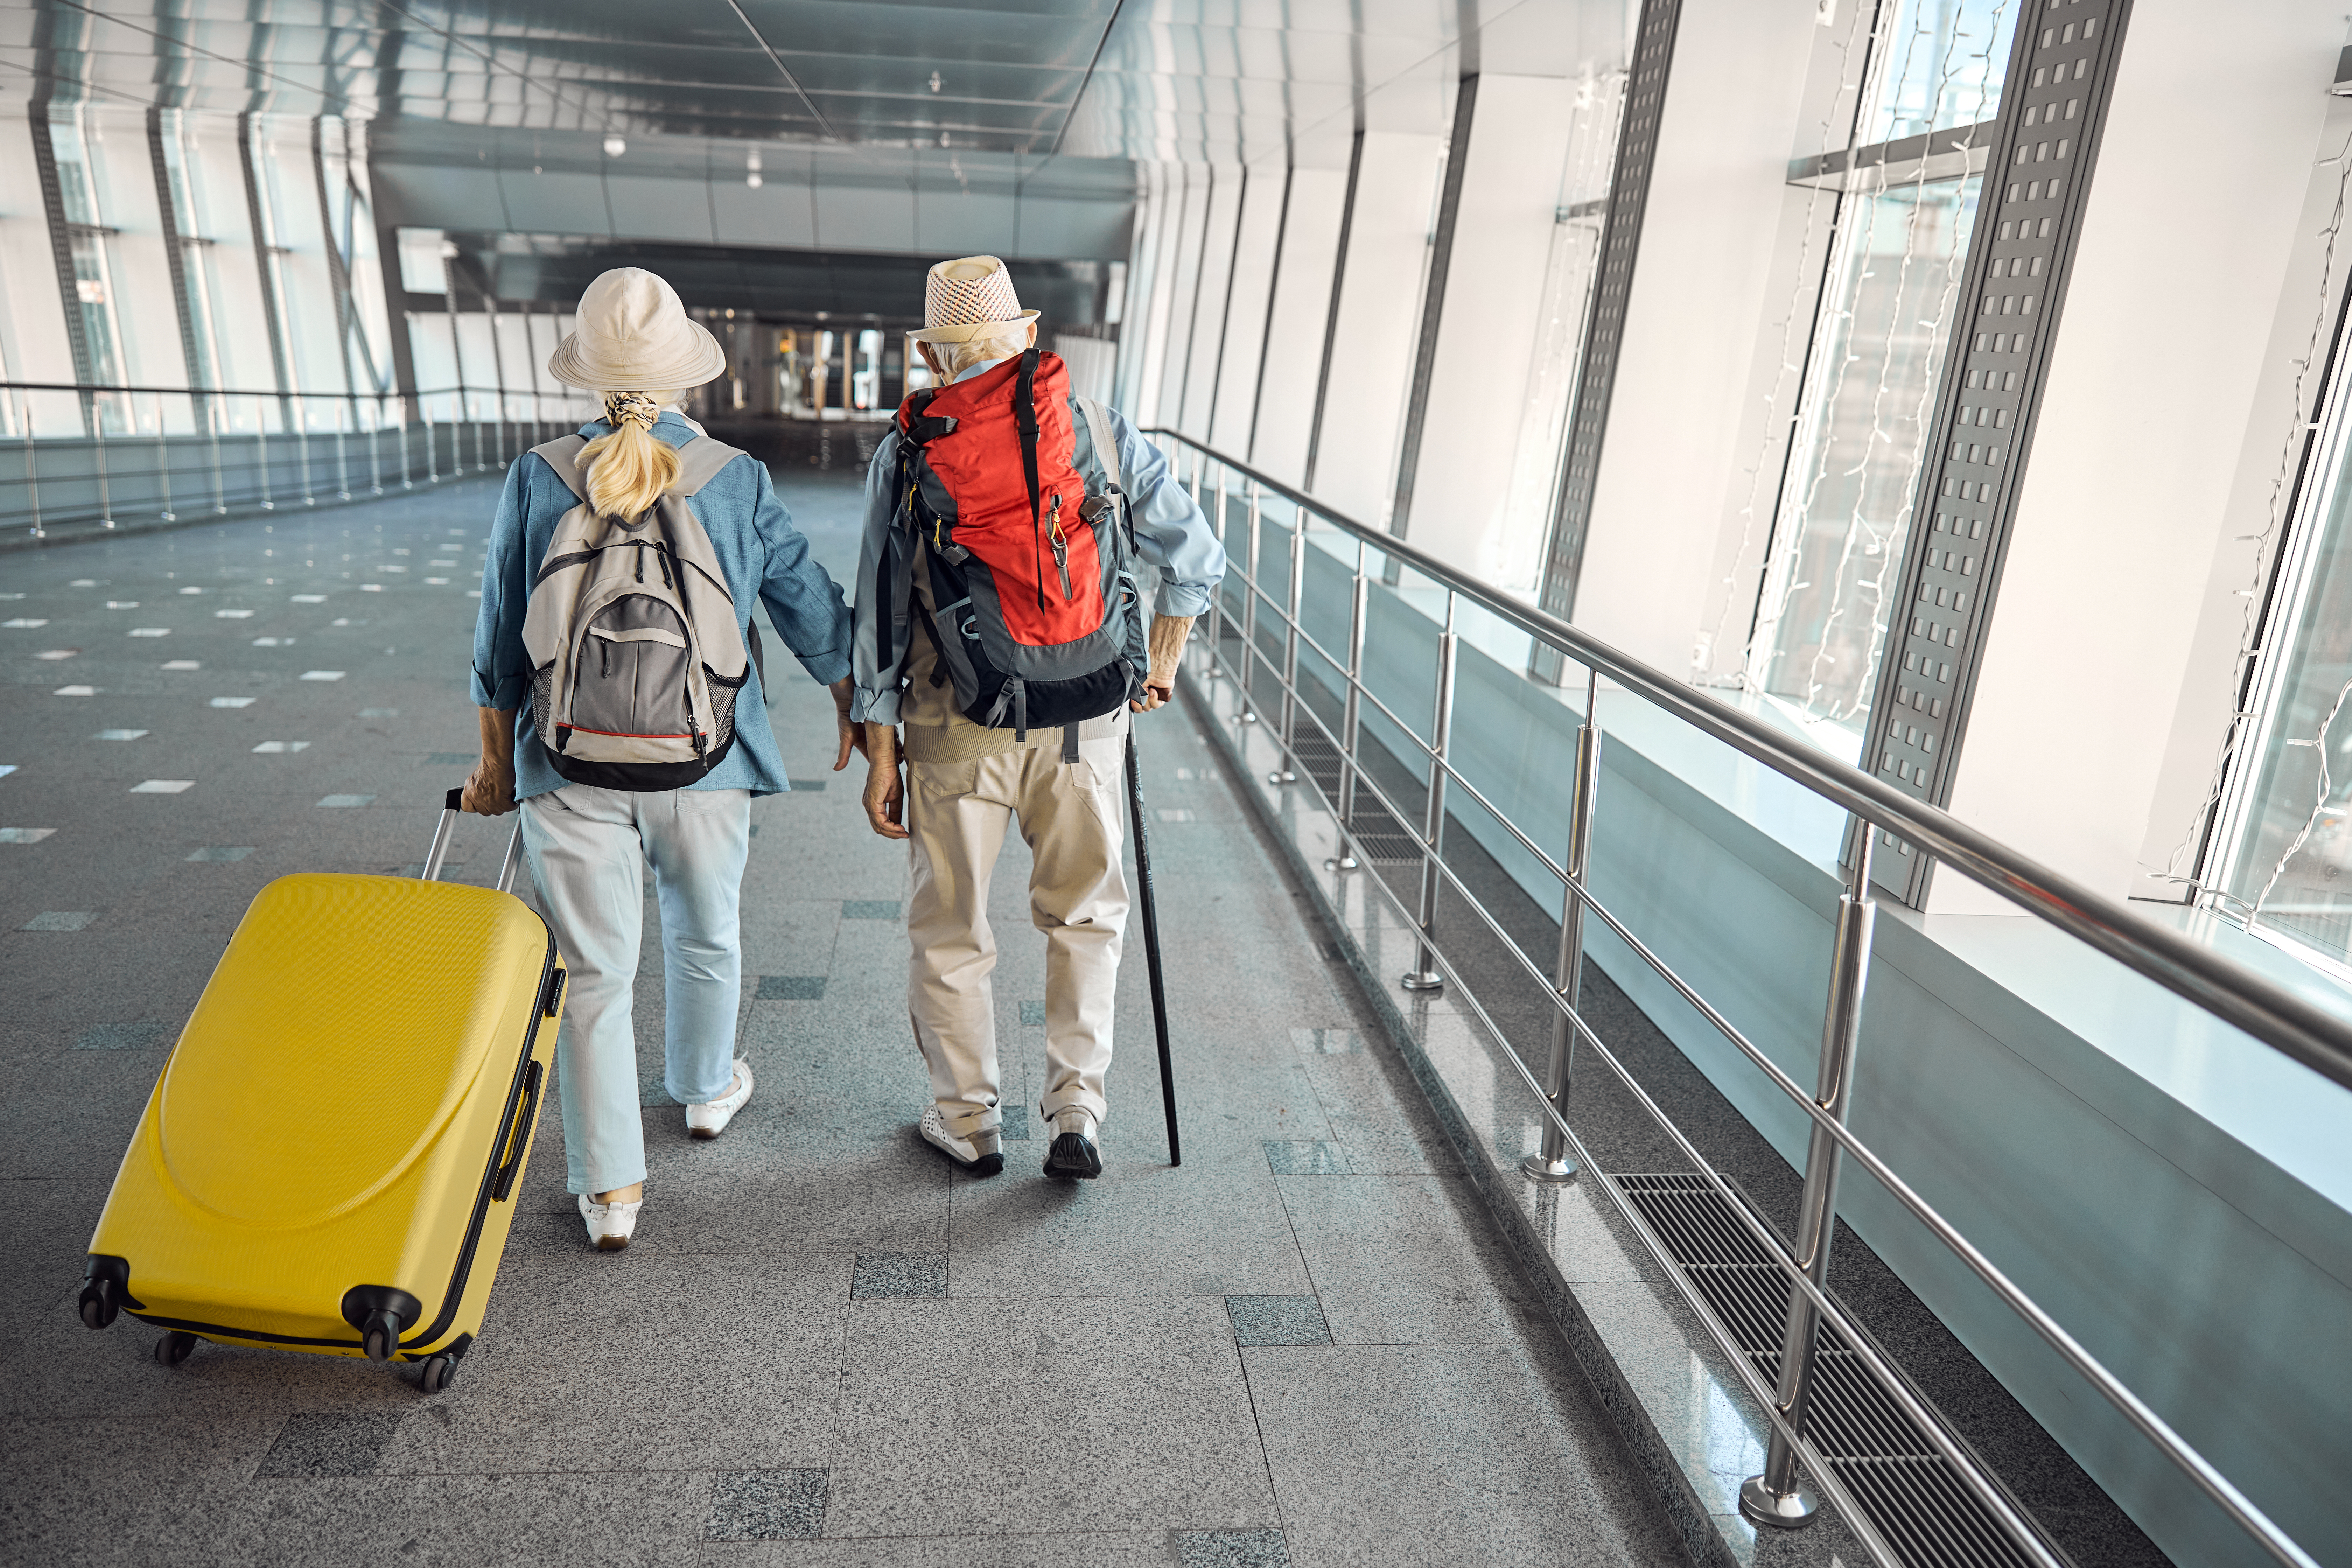 An elderly couple at the airport with their luggage | Souce: Getty Images